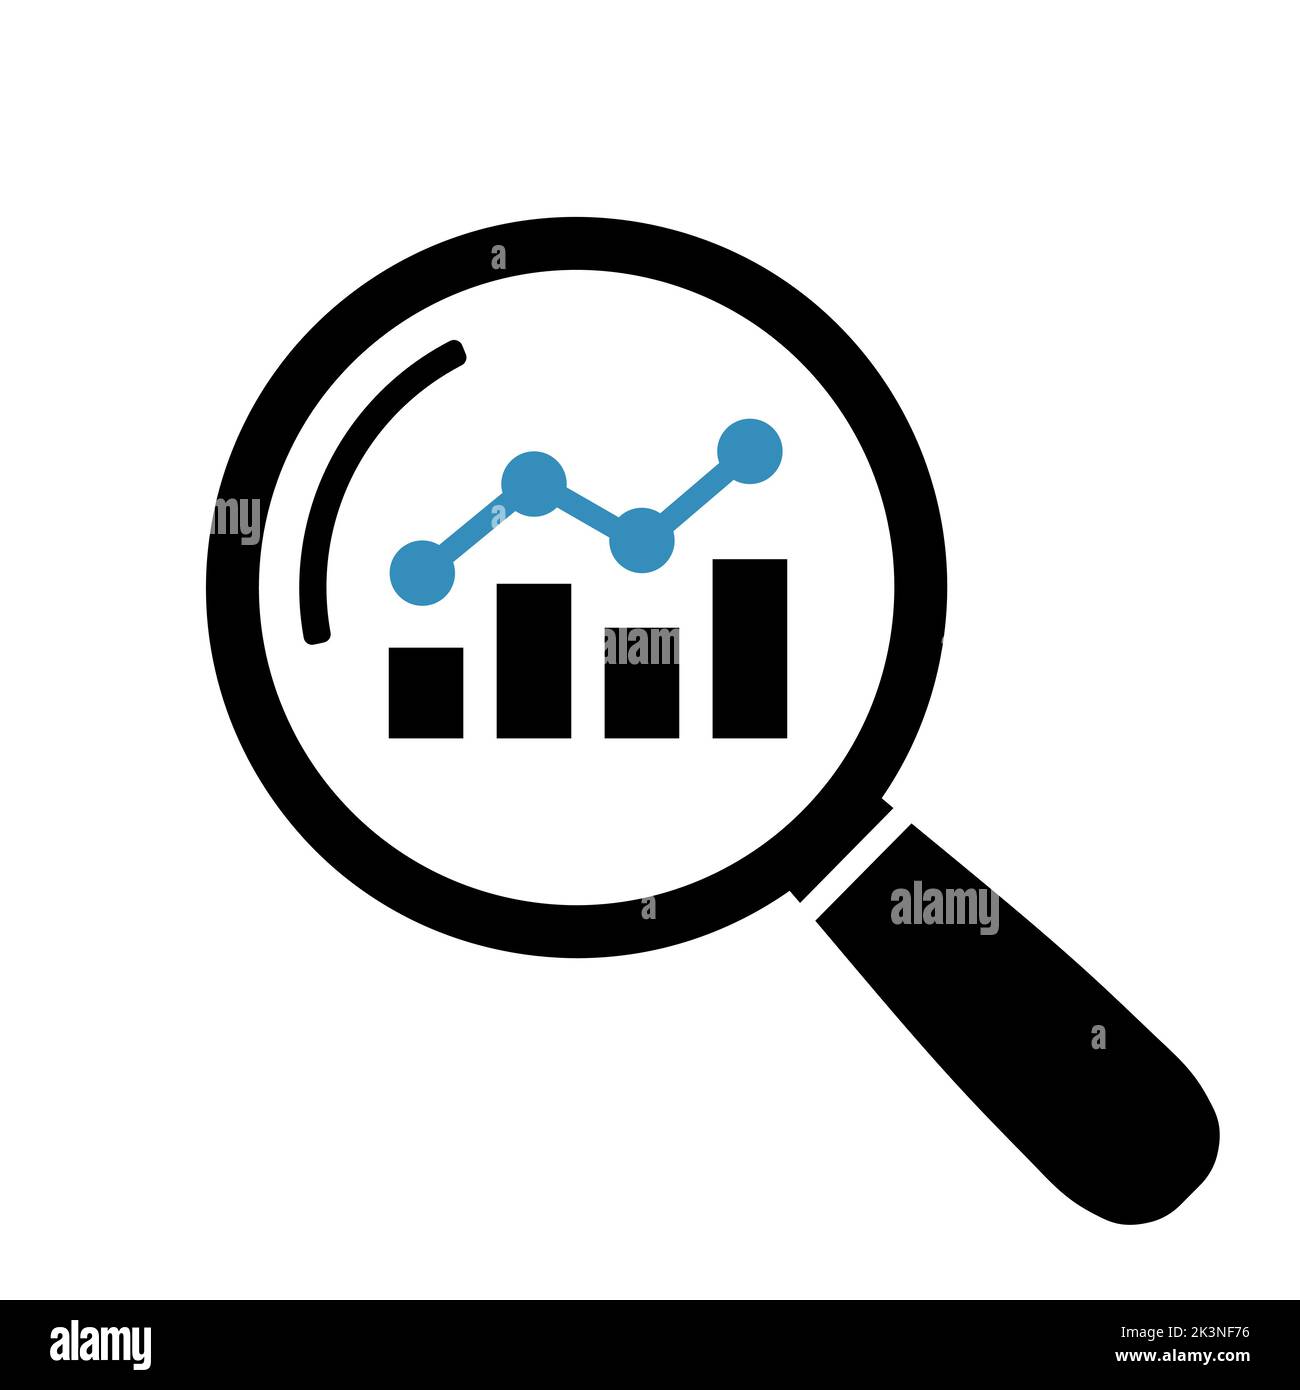 Business analysis icon. Marketing research icon Stock Vector